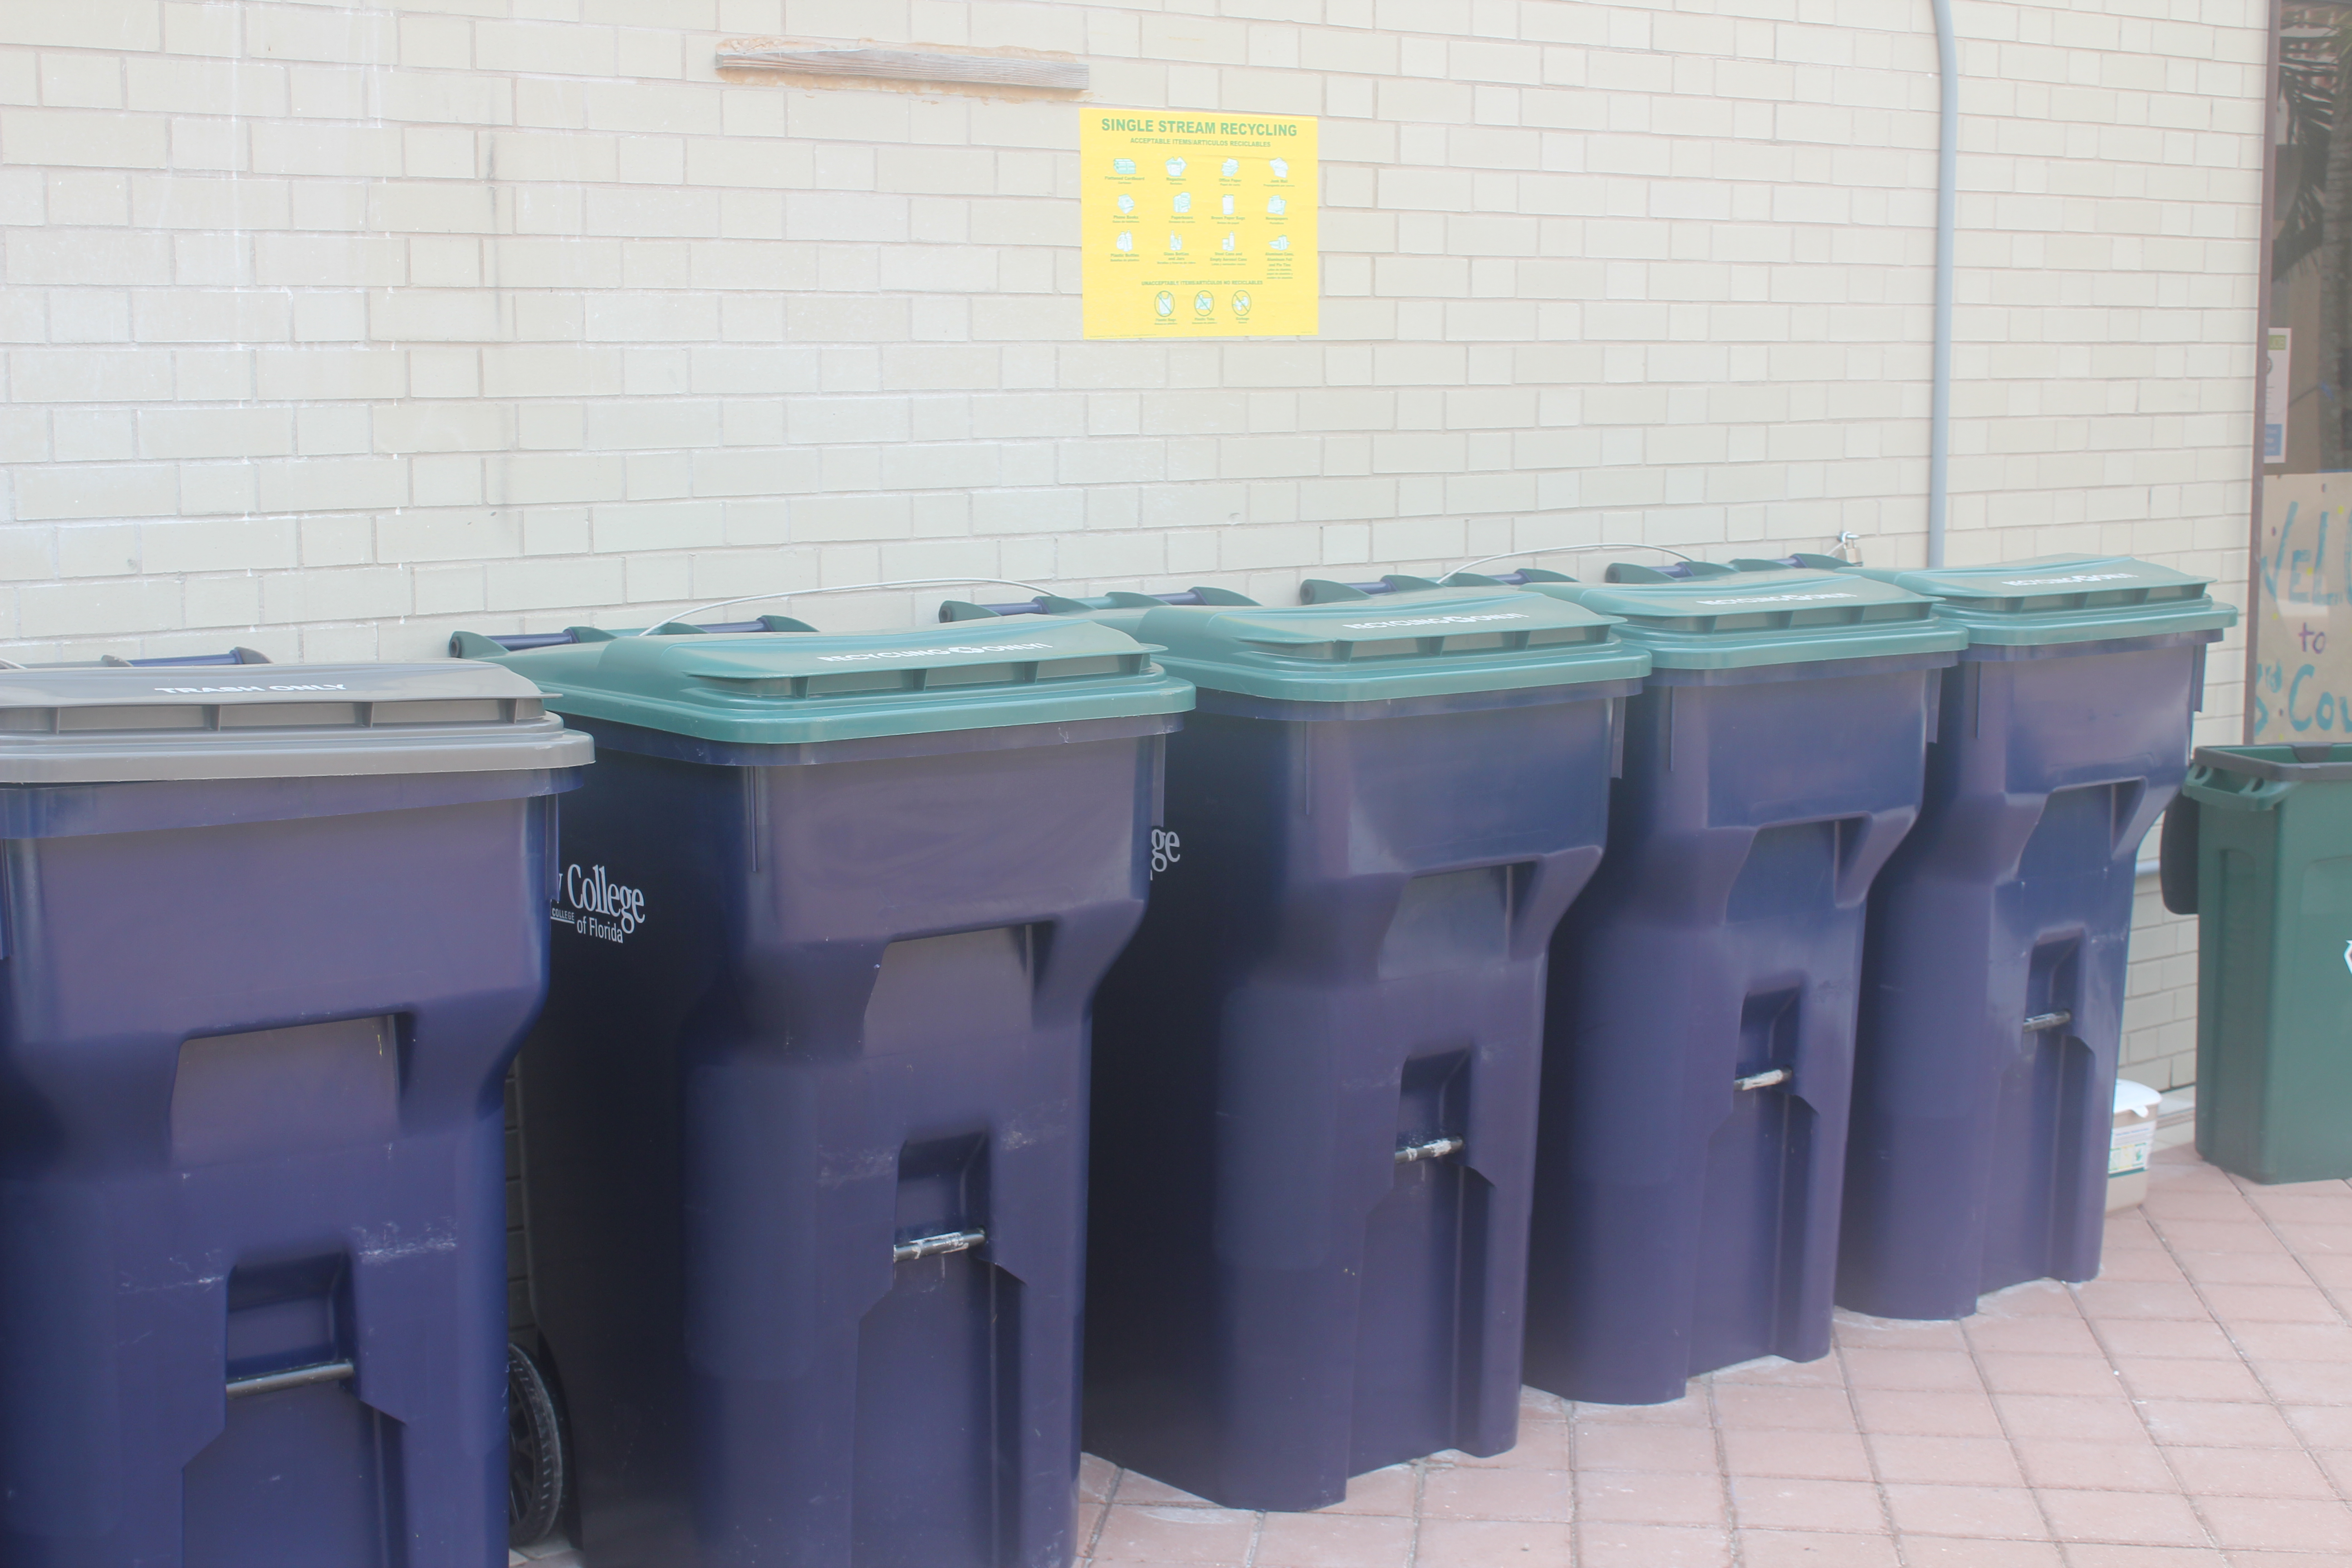 New recycling program helps students reach goals